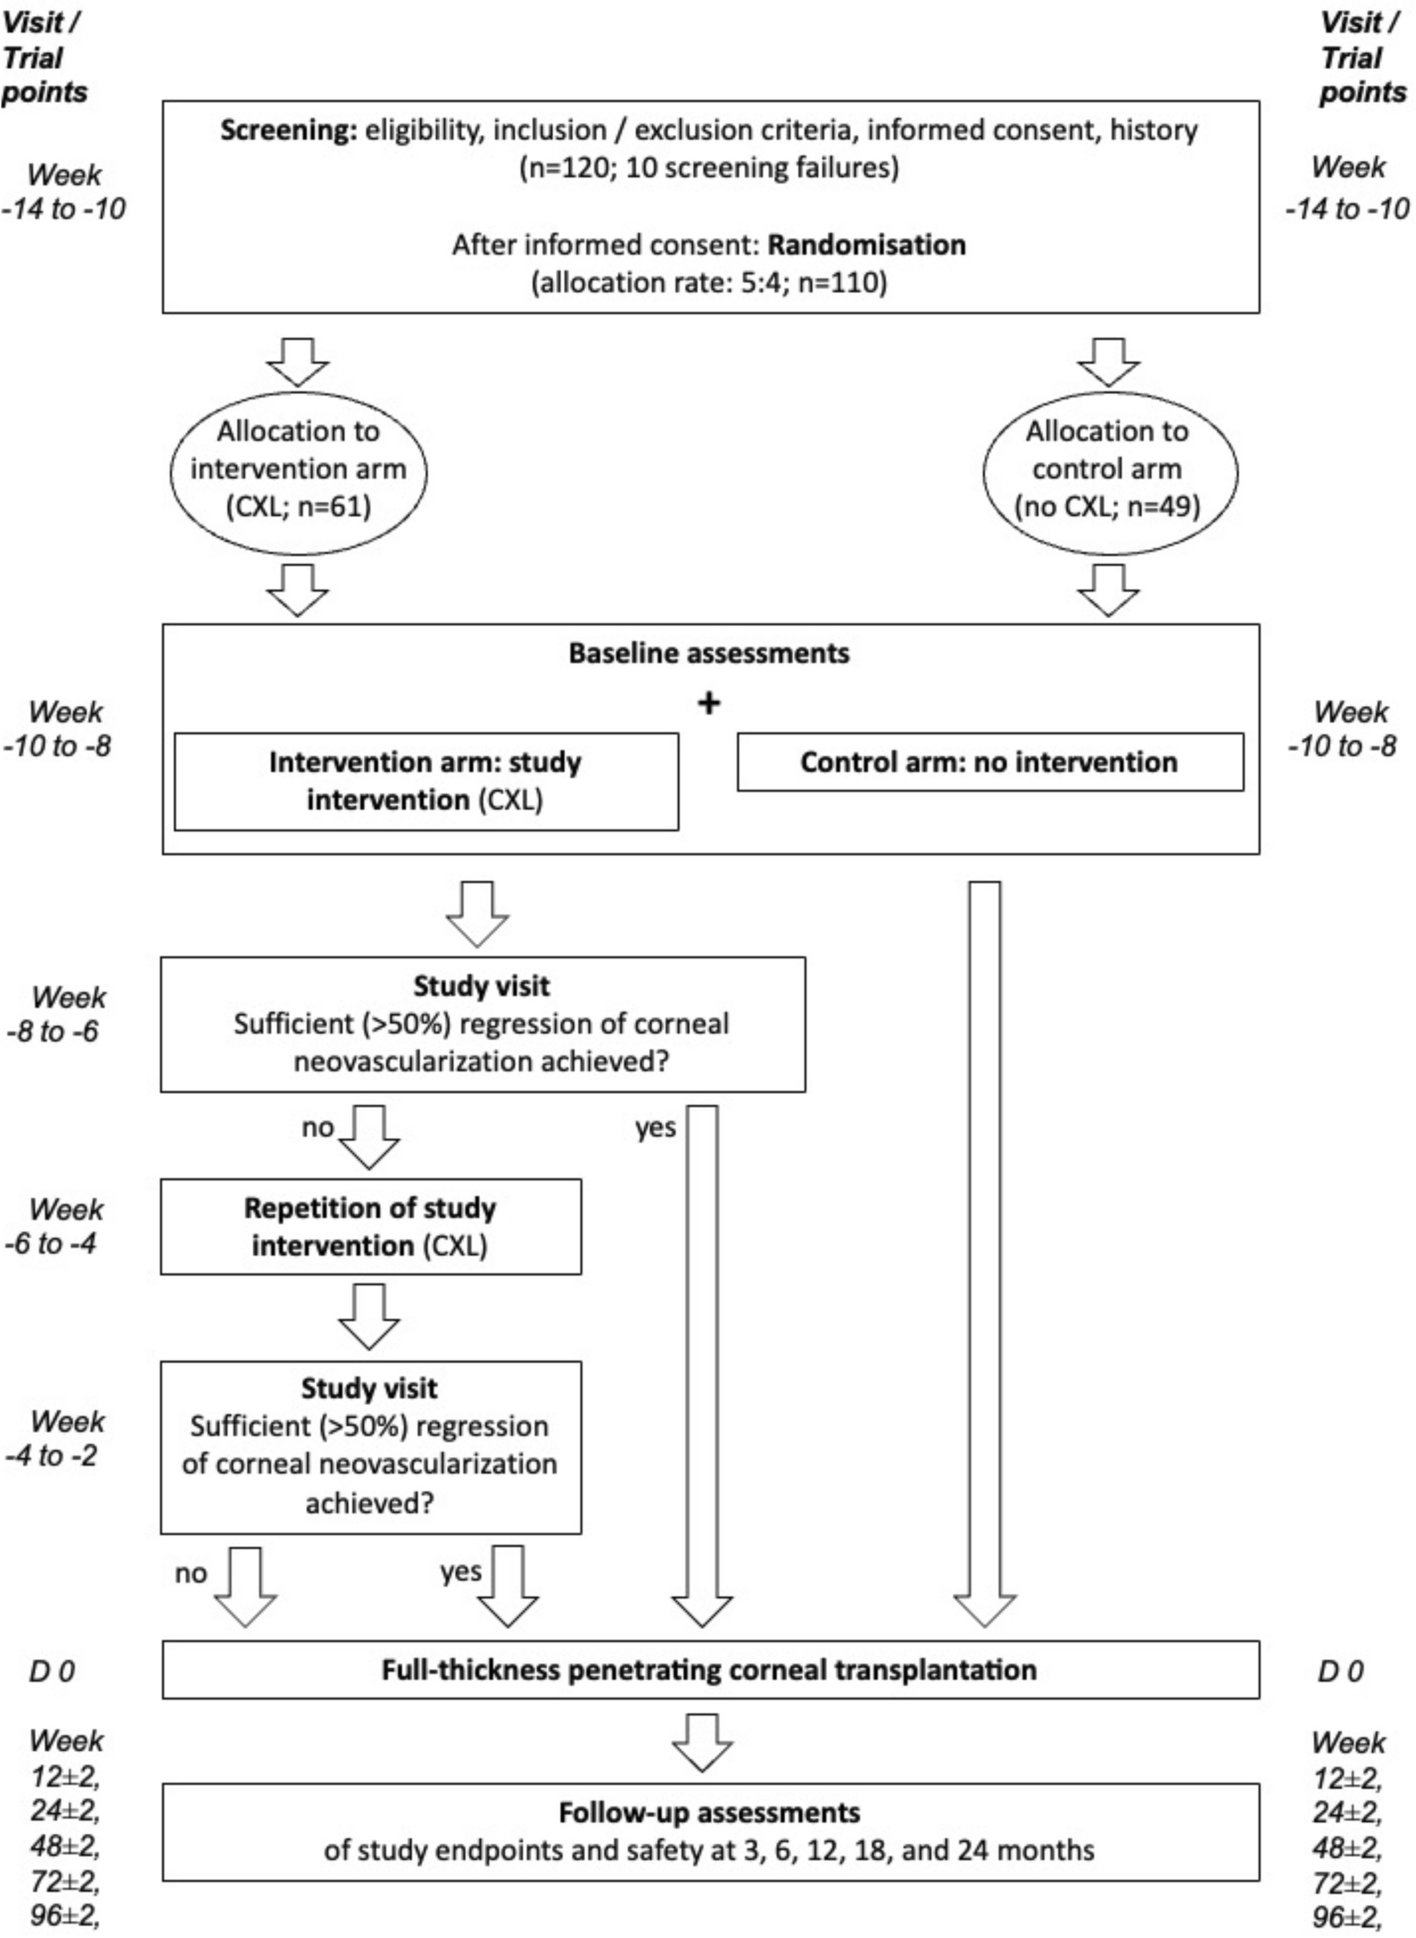 UV light-mediated corneal crosslinking as (lymph)angioregressive pretreatment to promote graft survival after subsequent high-risk corneal transplantation (CrossCornealVision): protocol for a multicenter, randomized controlled trial